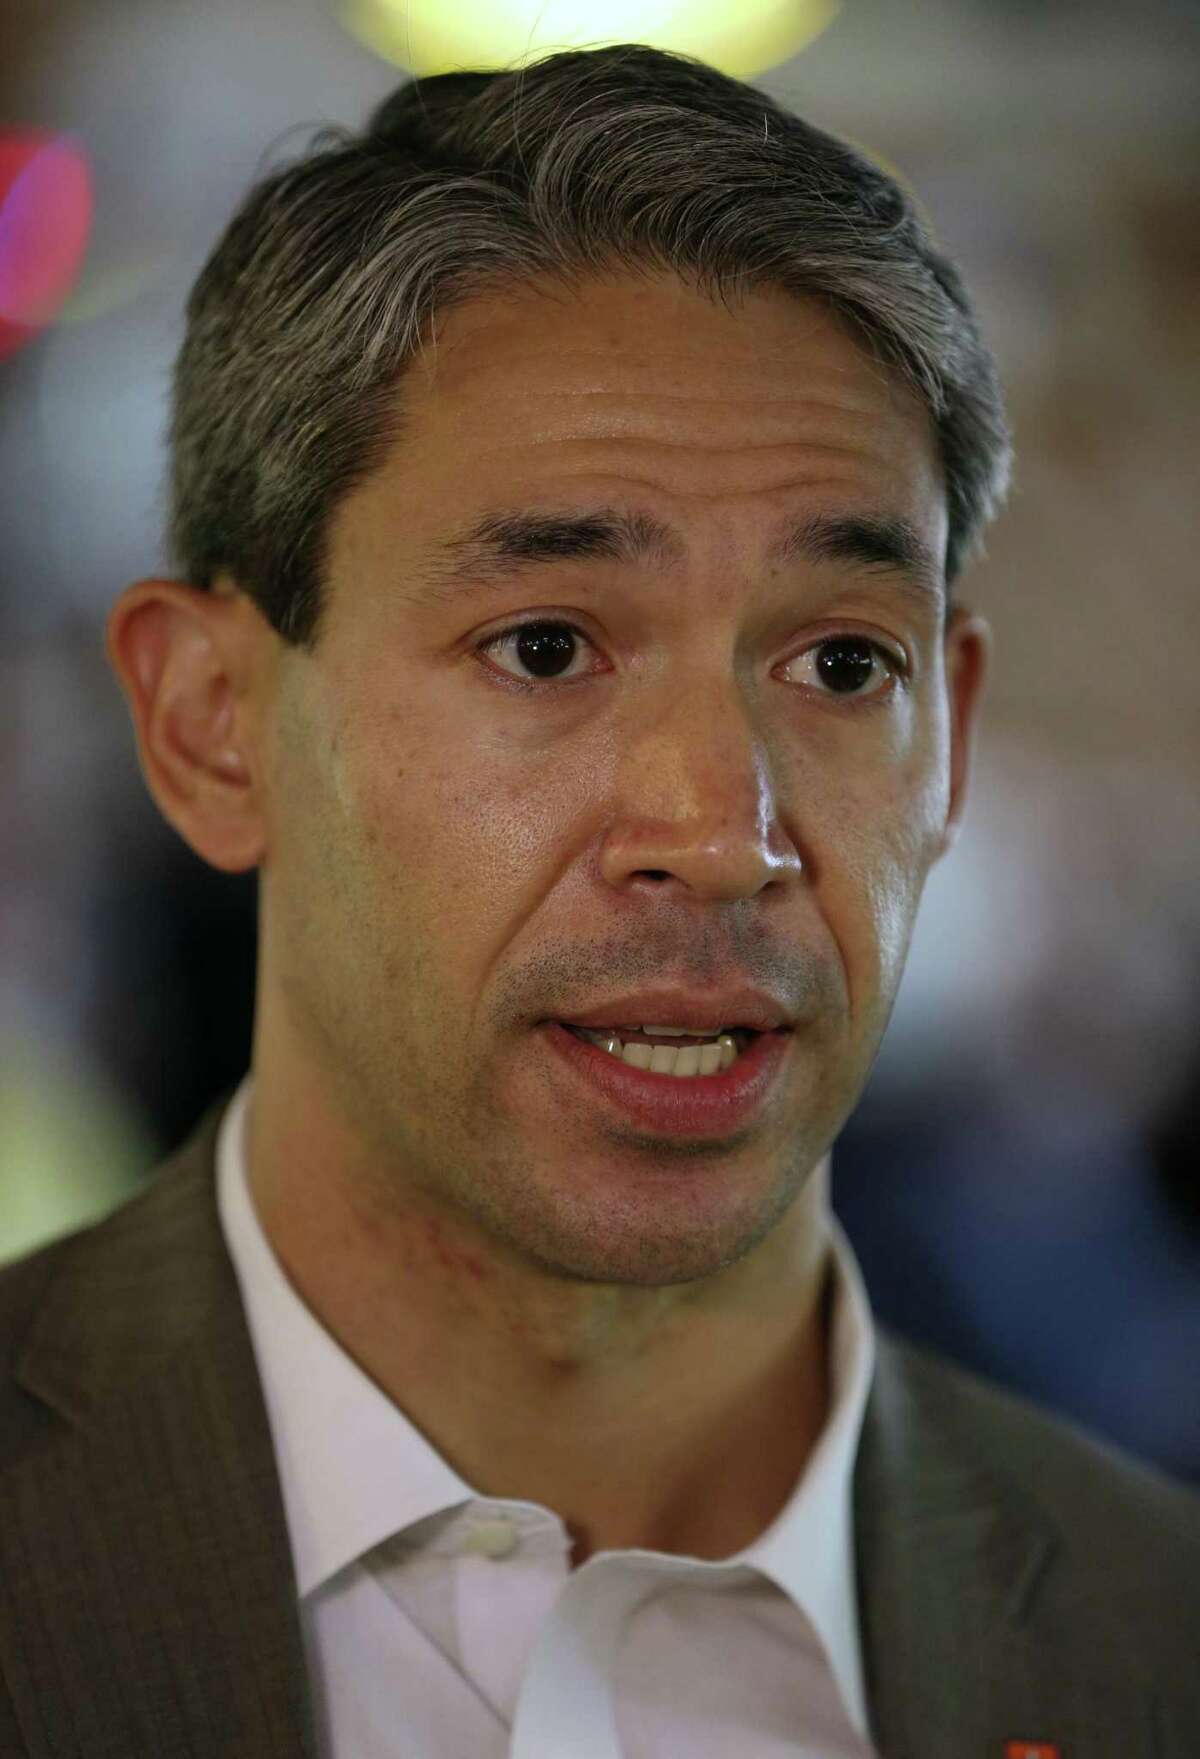 Councilman Ron Nirenberg talks to the media Tuesday, April 26, 2016 before the start of his monthly town hall meetings in his district.